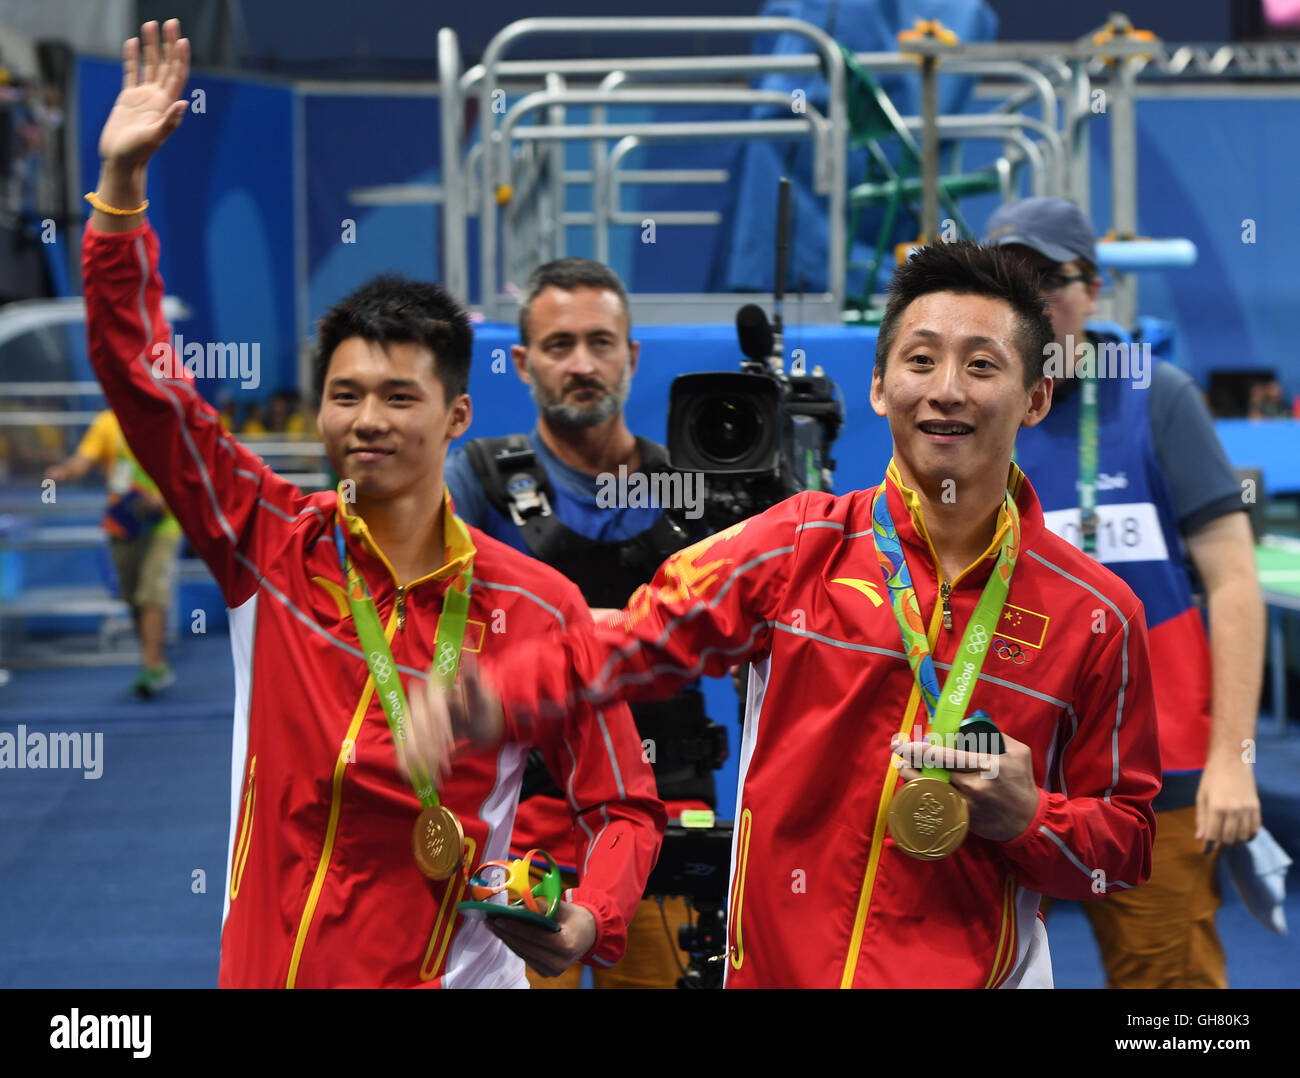 Rio de Janeiro, Brazil. 08th Aug, 2016. Chen Aisen (L) and Lin Yue (R) of China pose with their gold medals after winning the Men's Synchronised 10m Platform Final Swimming event of the Rio 2016 Olympic Games at the Olympic Aquatics Stadium, Rio de Janeiro, Brazil, 8 August 2016. Credit:  dpa picture alliance/Alamy Live News Stock Photo